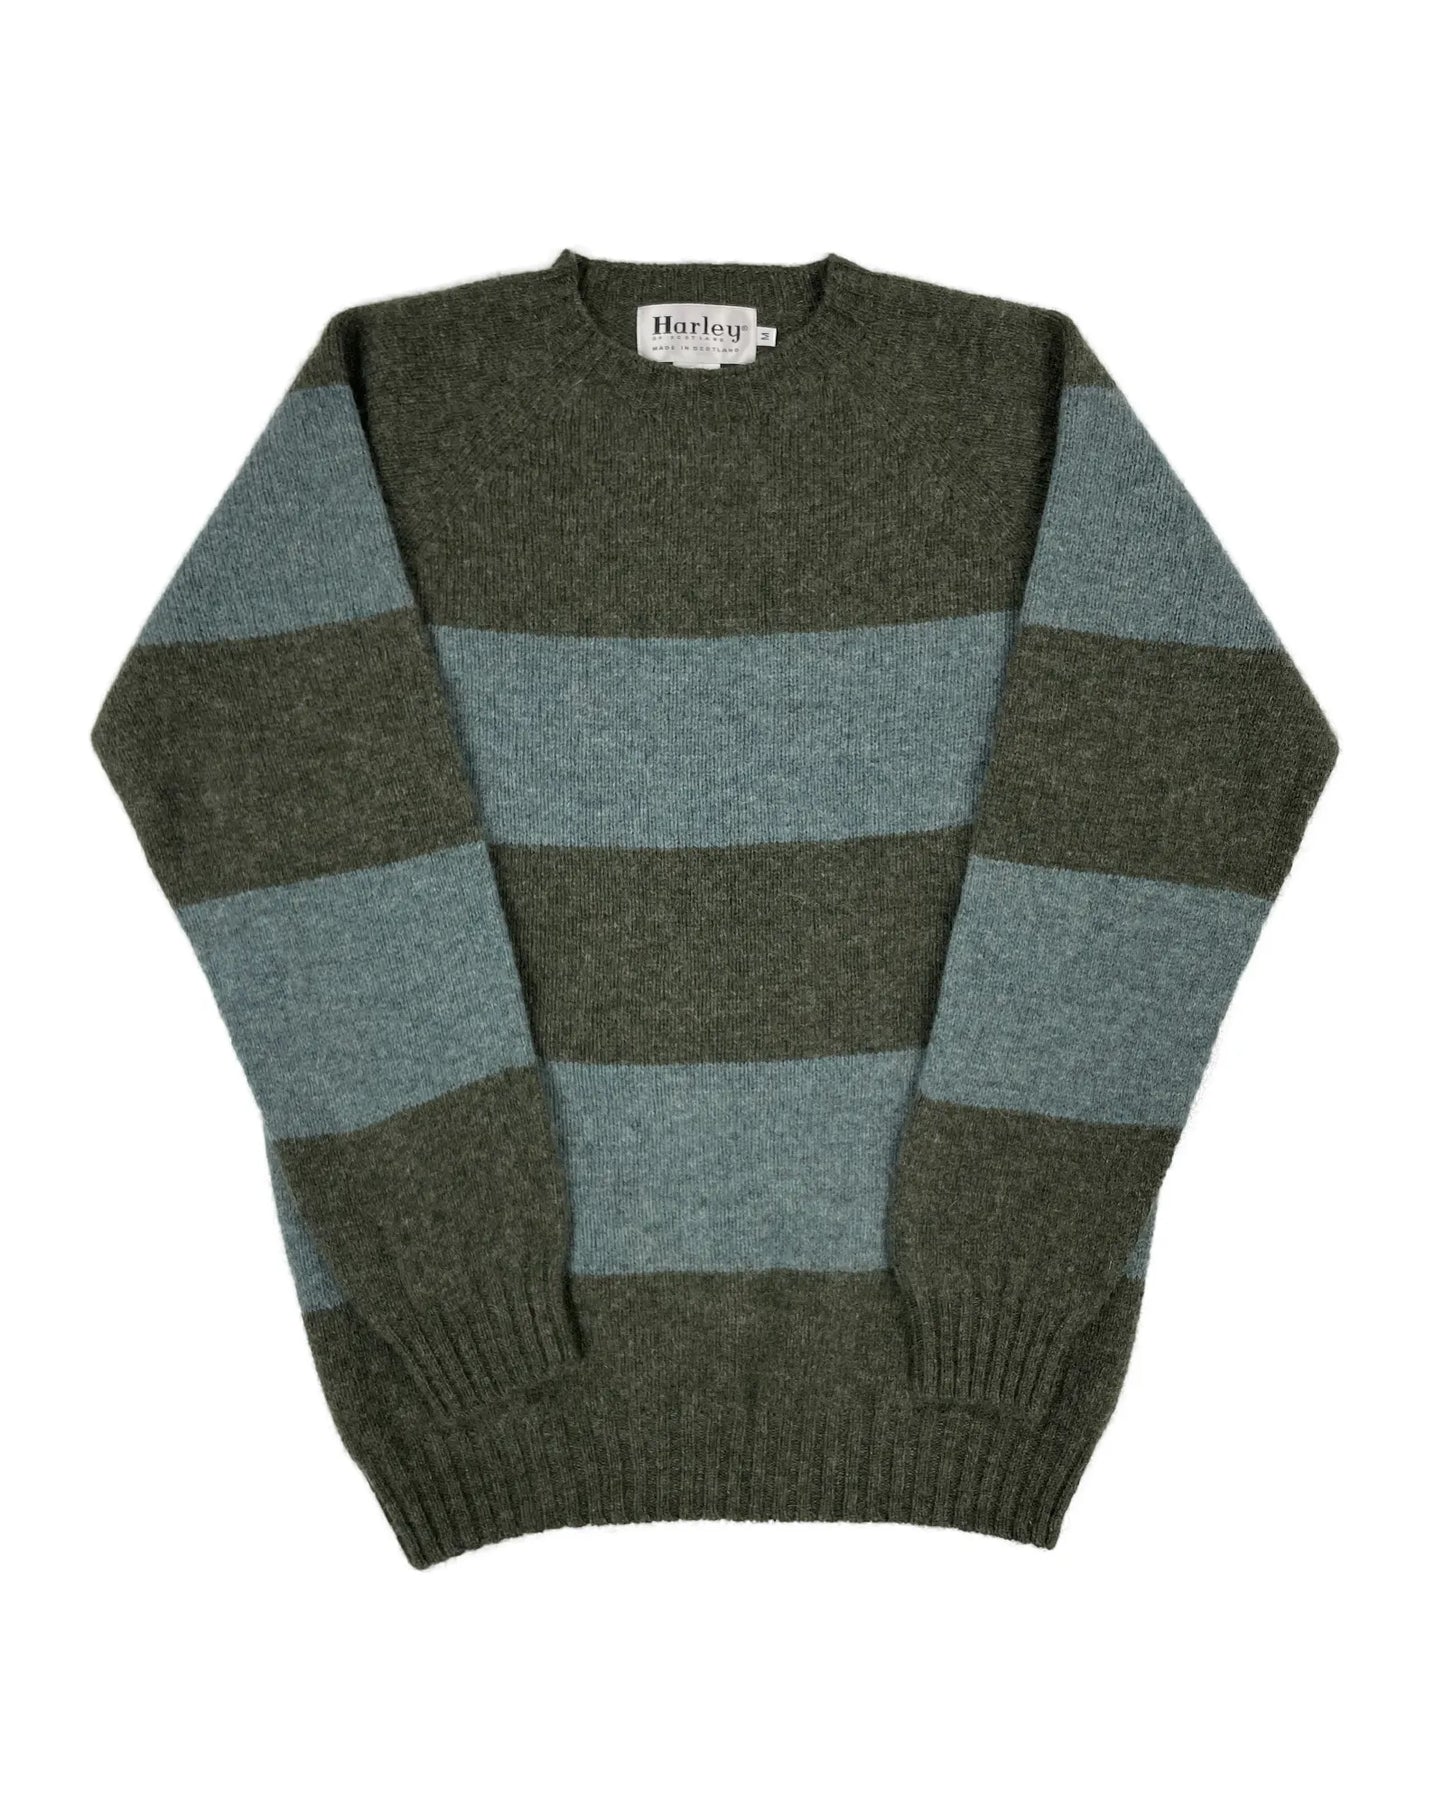 Mens Knitted Jumper (M3342/7) - Spruce/Graphite Green